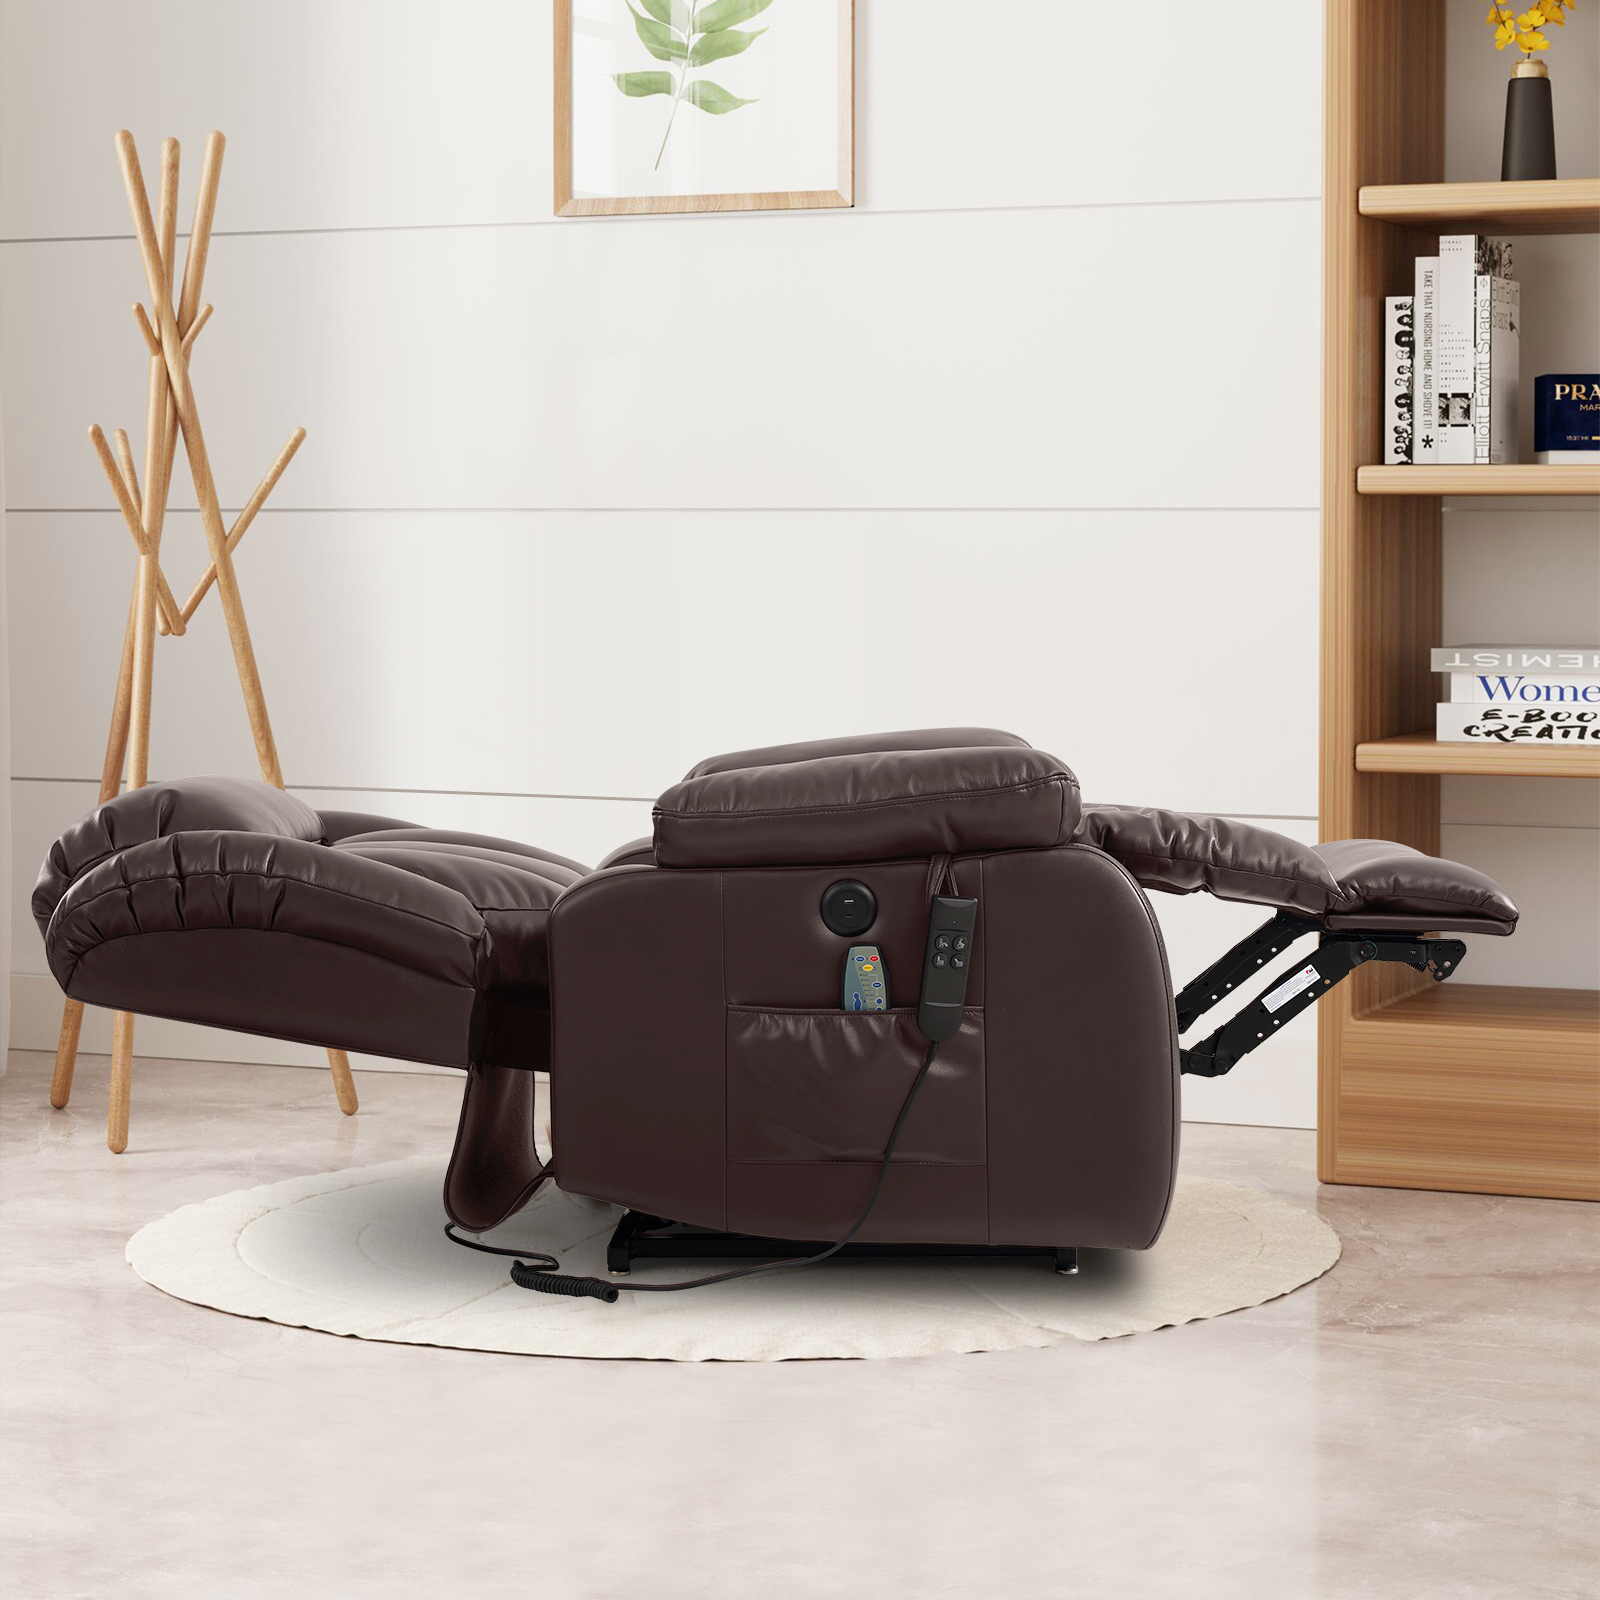 TEKAMON Infinite Position Lift Recliner Chair for Elderly with Heat and Massage Lay Flat Sleeping Leather Dual Motor Power Lift Chair for Living Room (Brown) - image 1 of 12